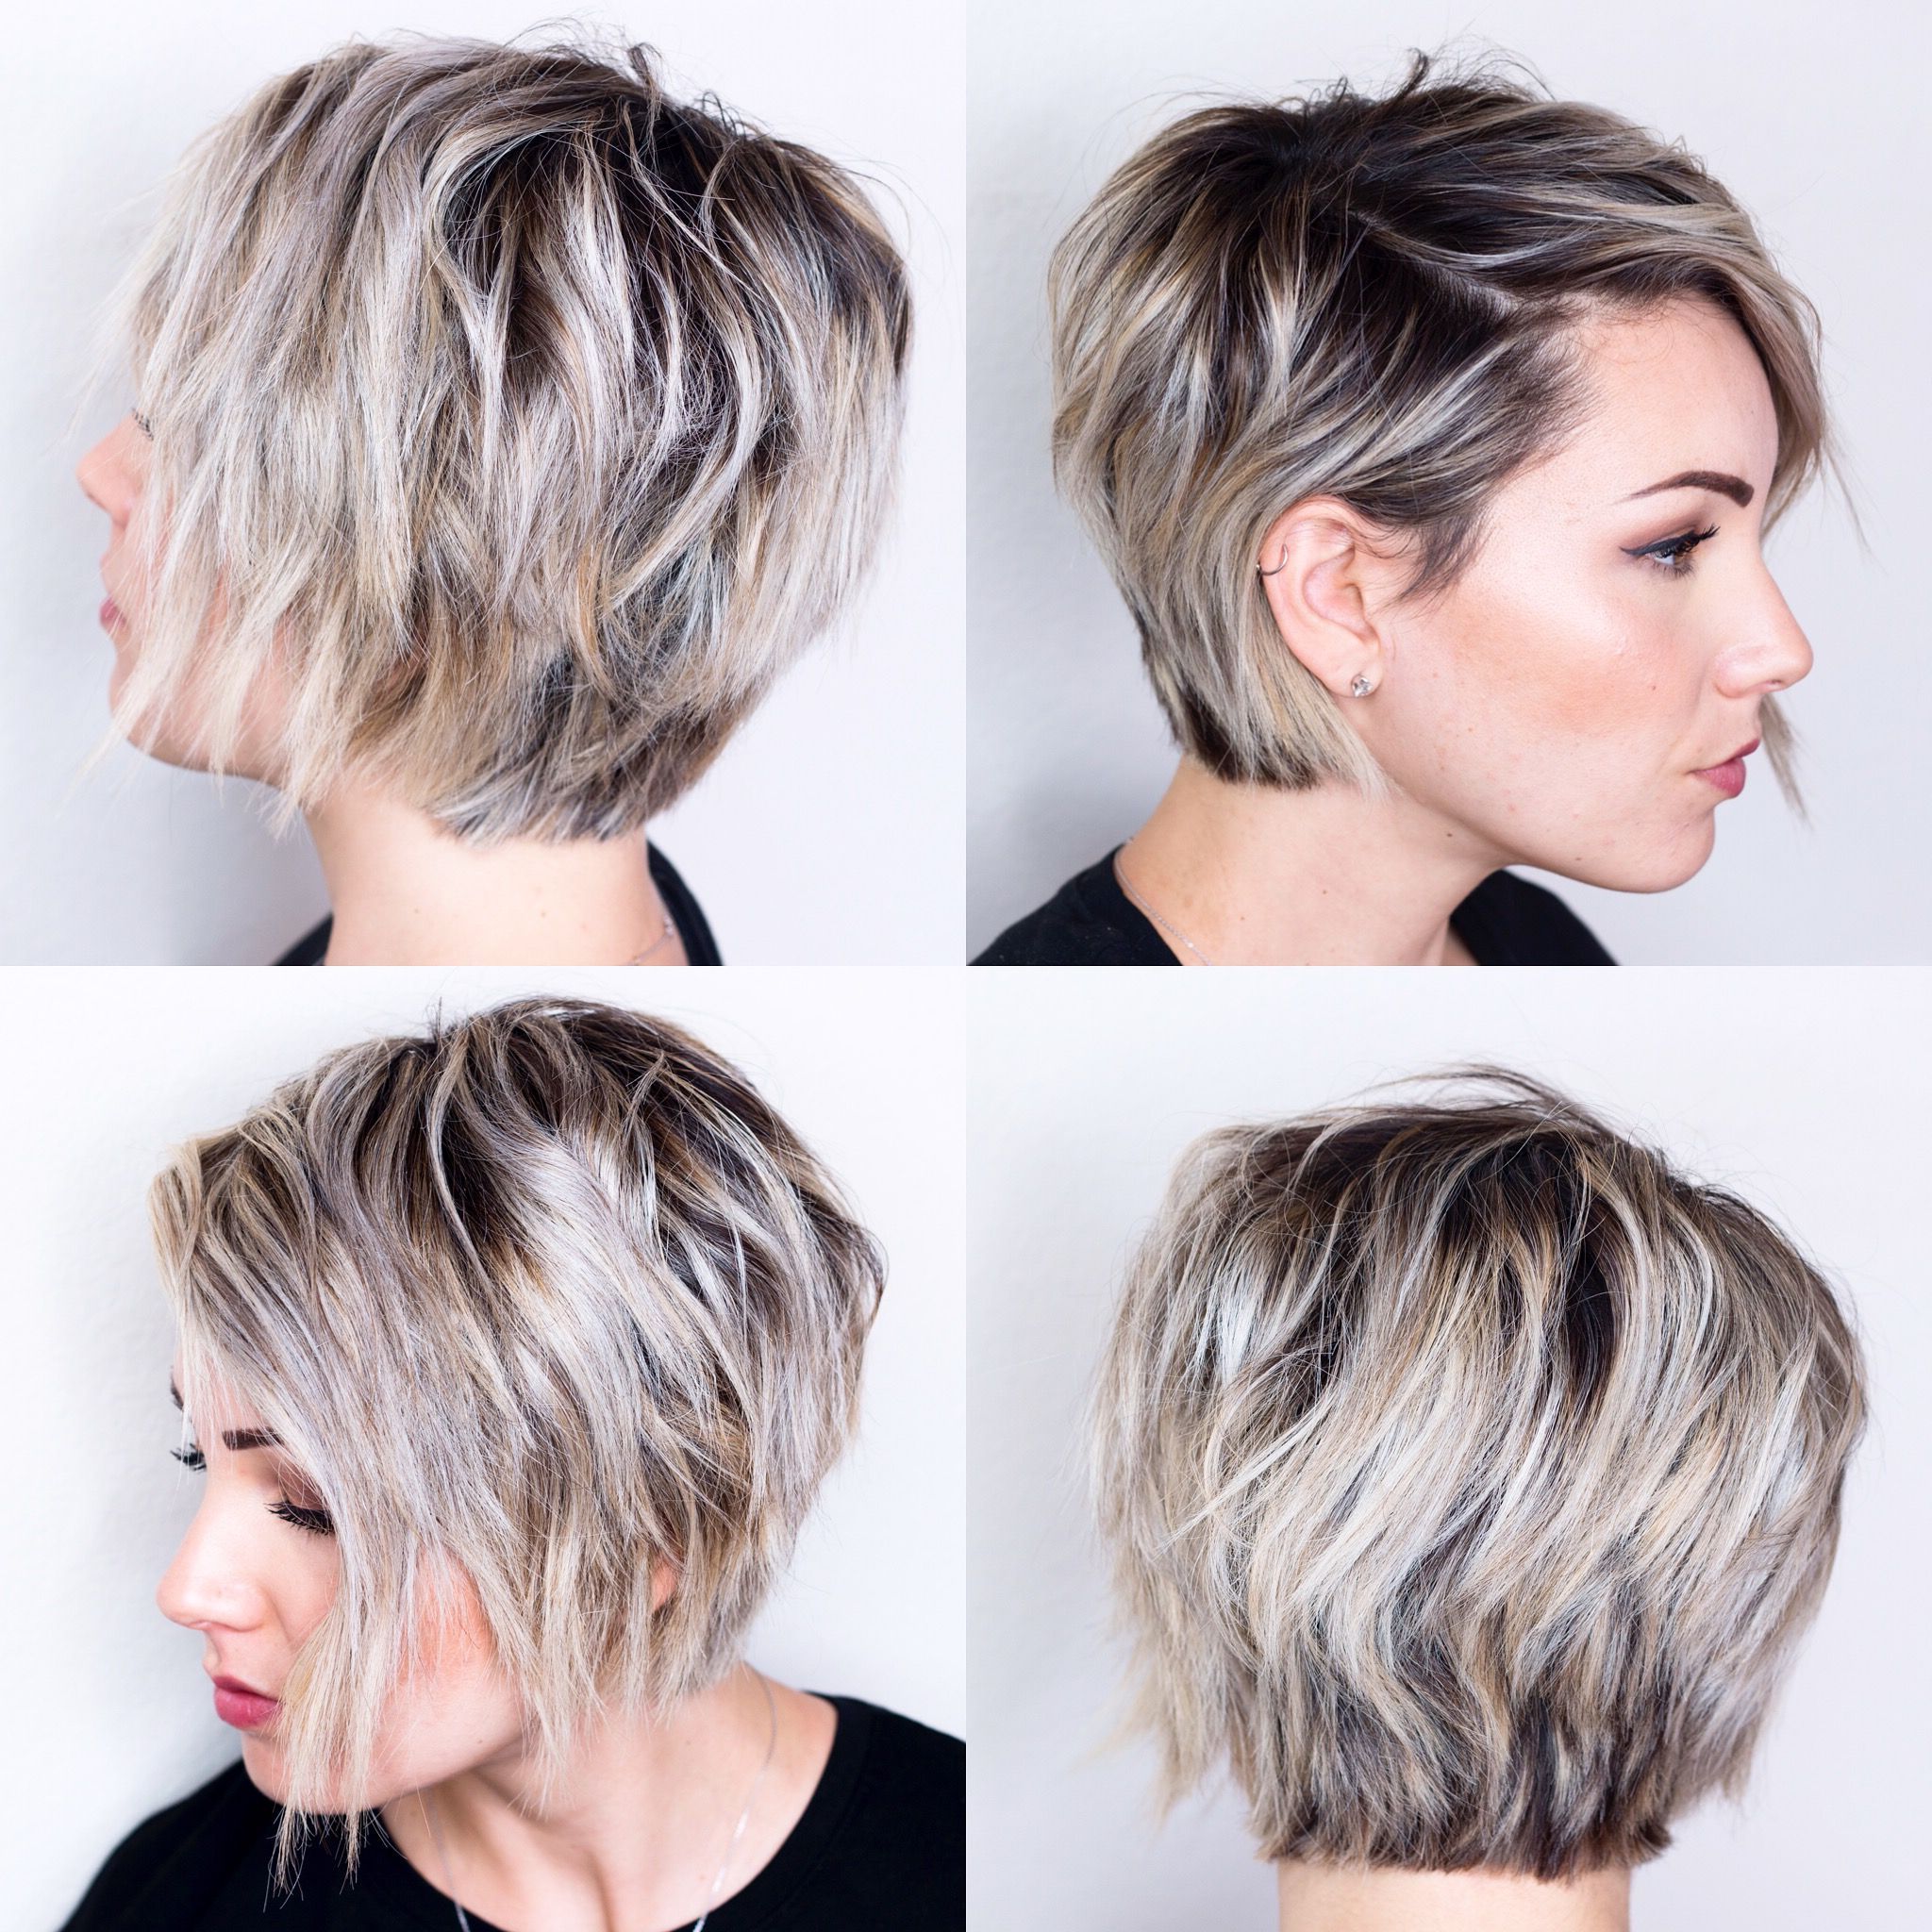 360 View Of Short Hair | H A I R In 2018 | Pinterest | Short Hair Regarding Short Hairstyles For An Oval Face (View 3 of 25)